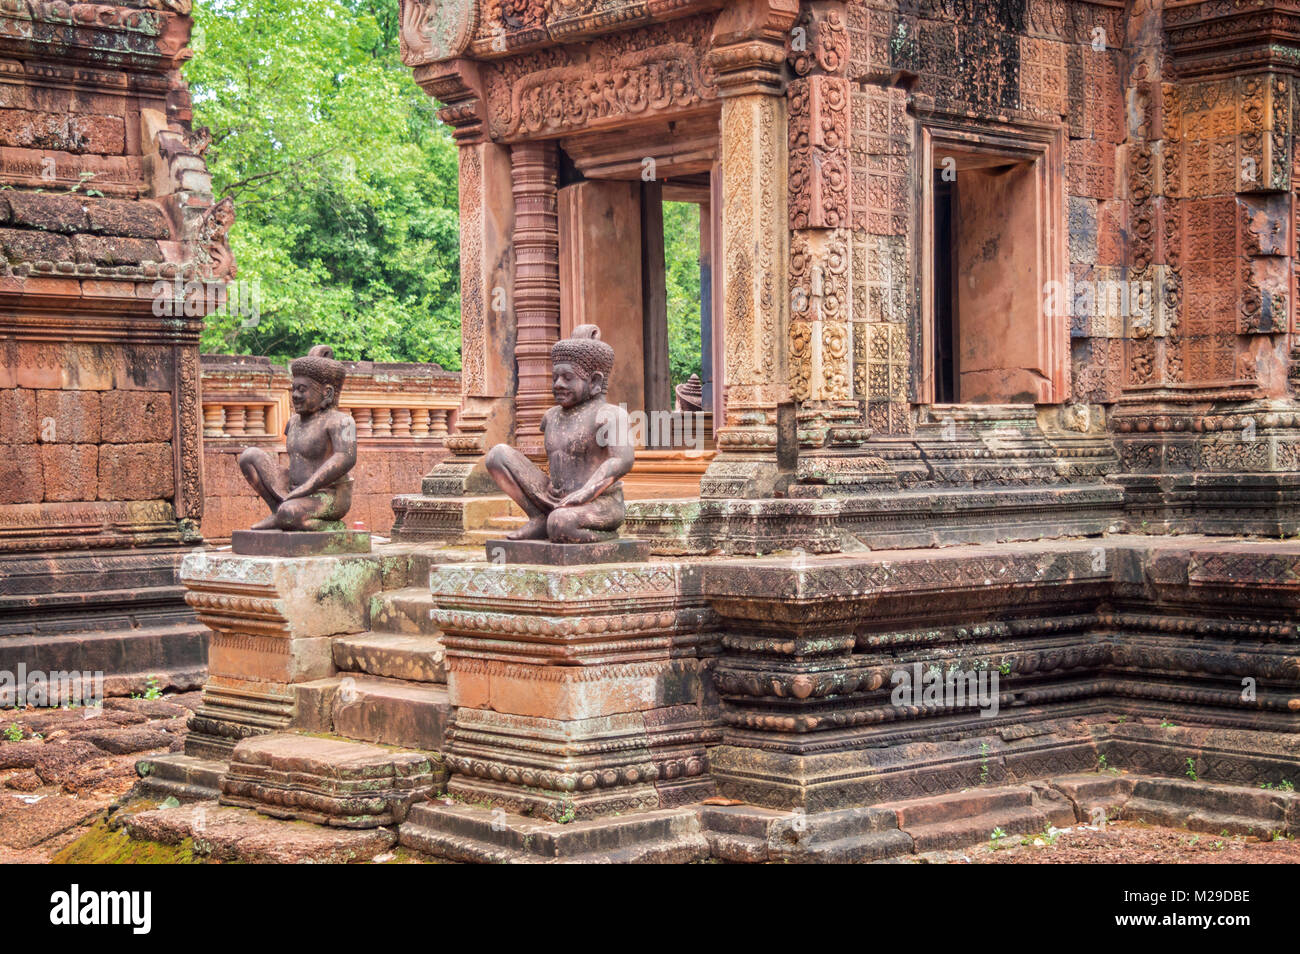 Ancient temple in Angkor Wat, Siem Rep, Cambodia Stock Photo